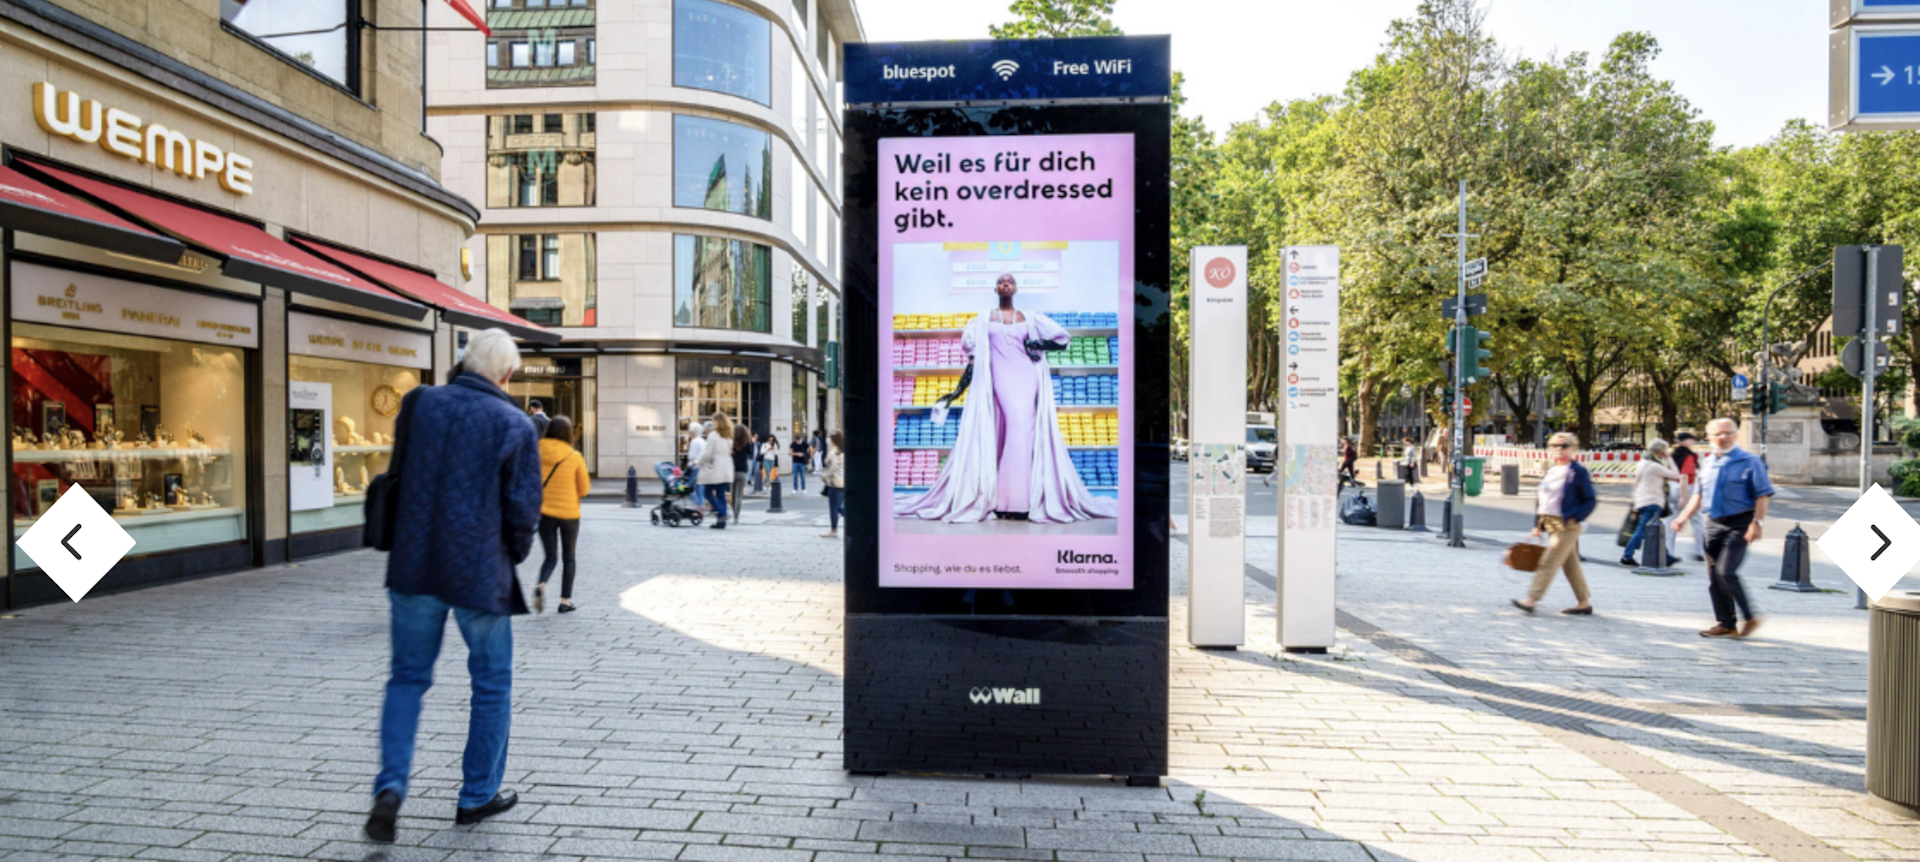 Klarna: Super-flexible, non-guaranteed campaign with an always-on